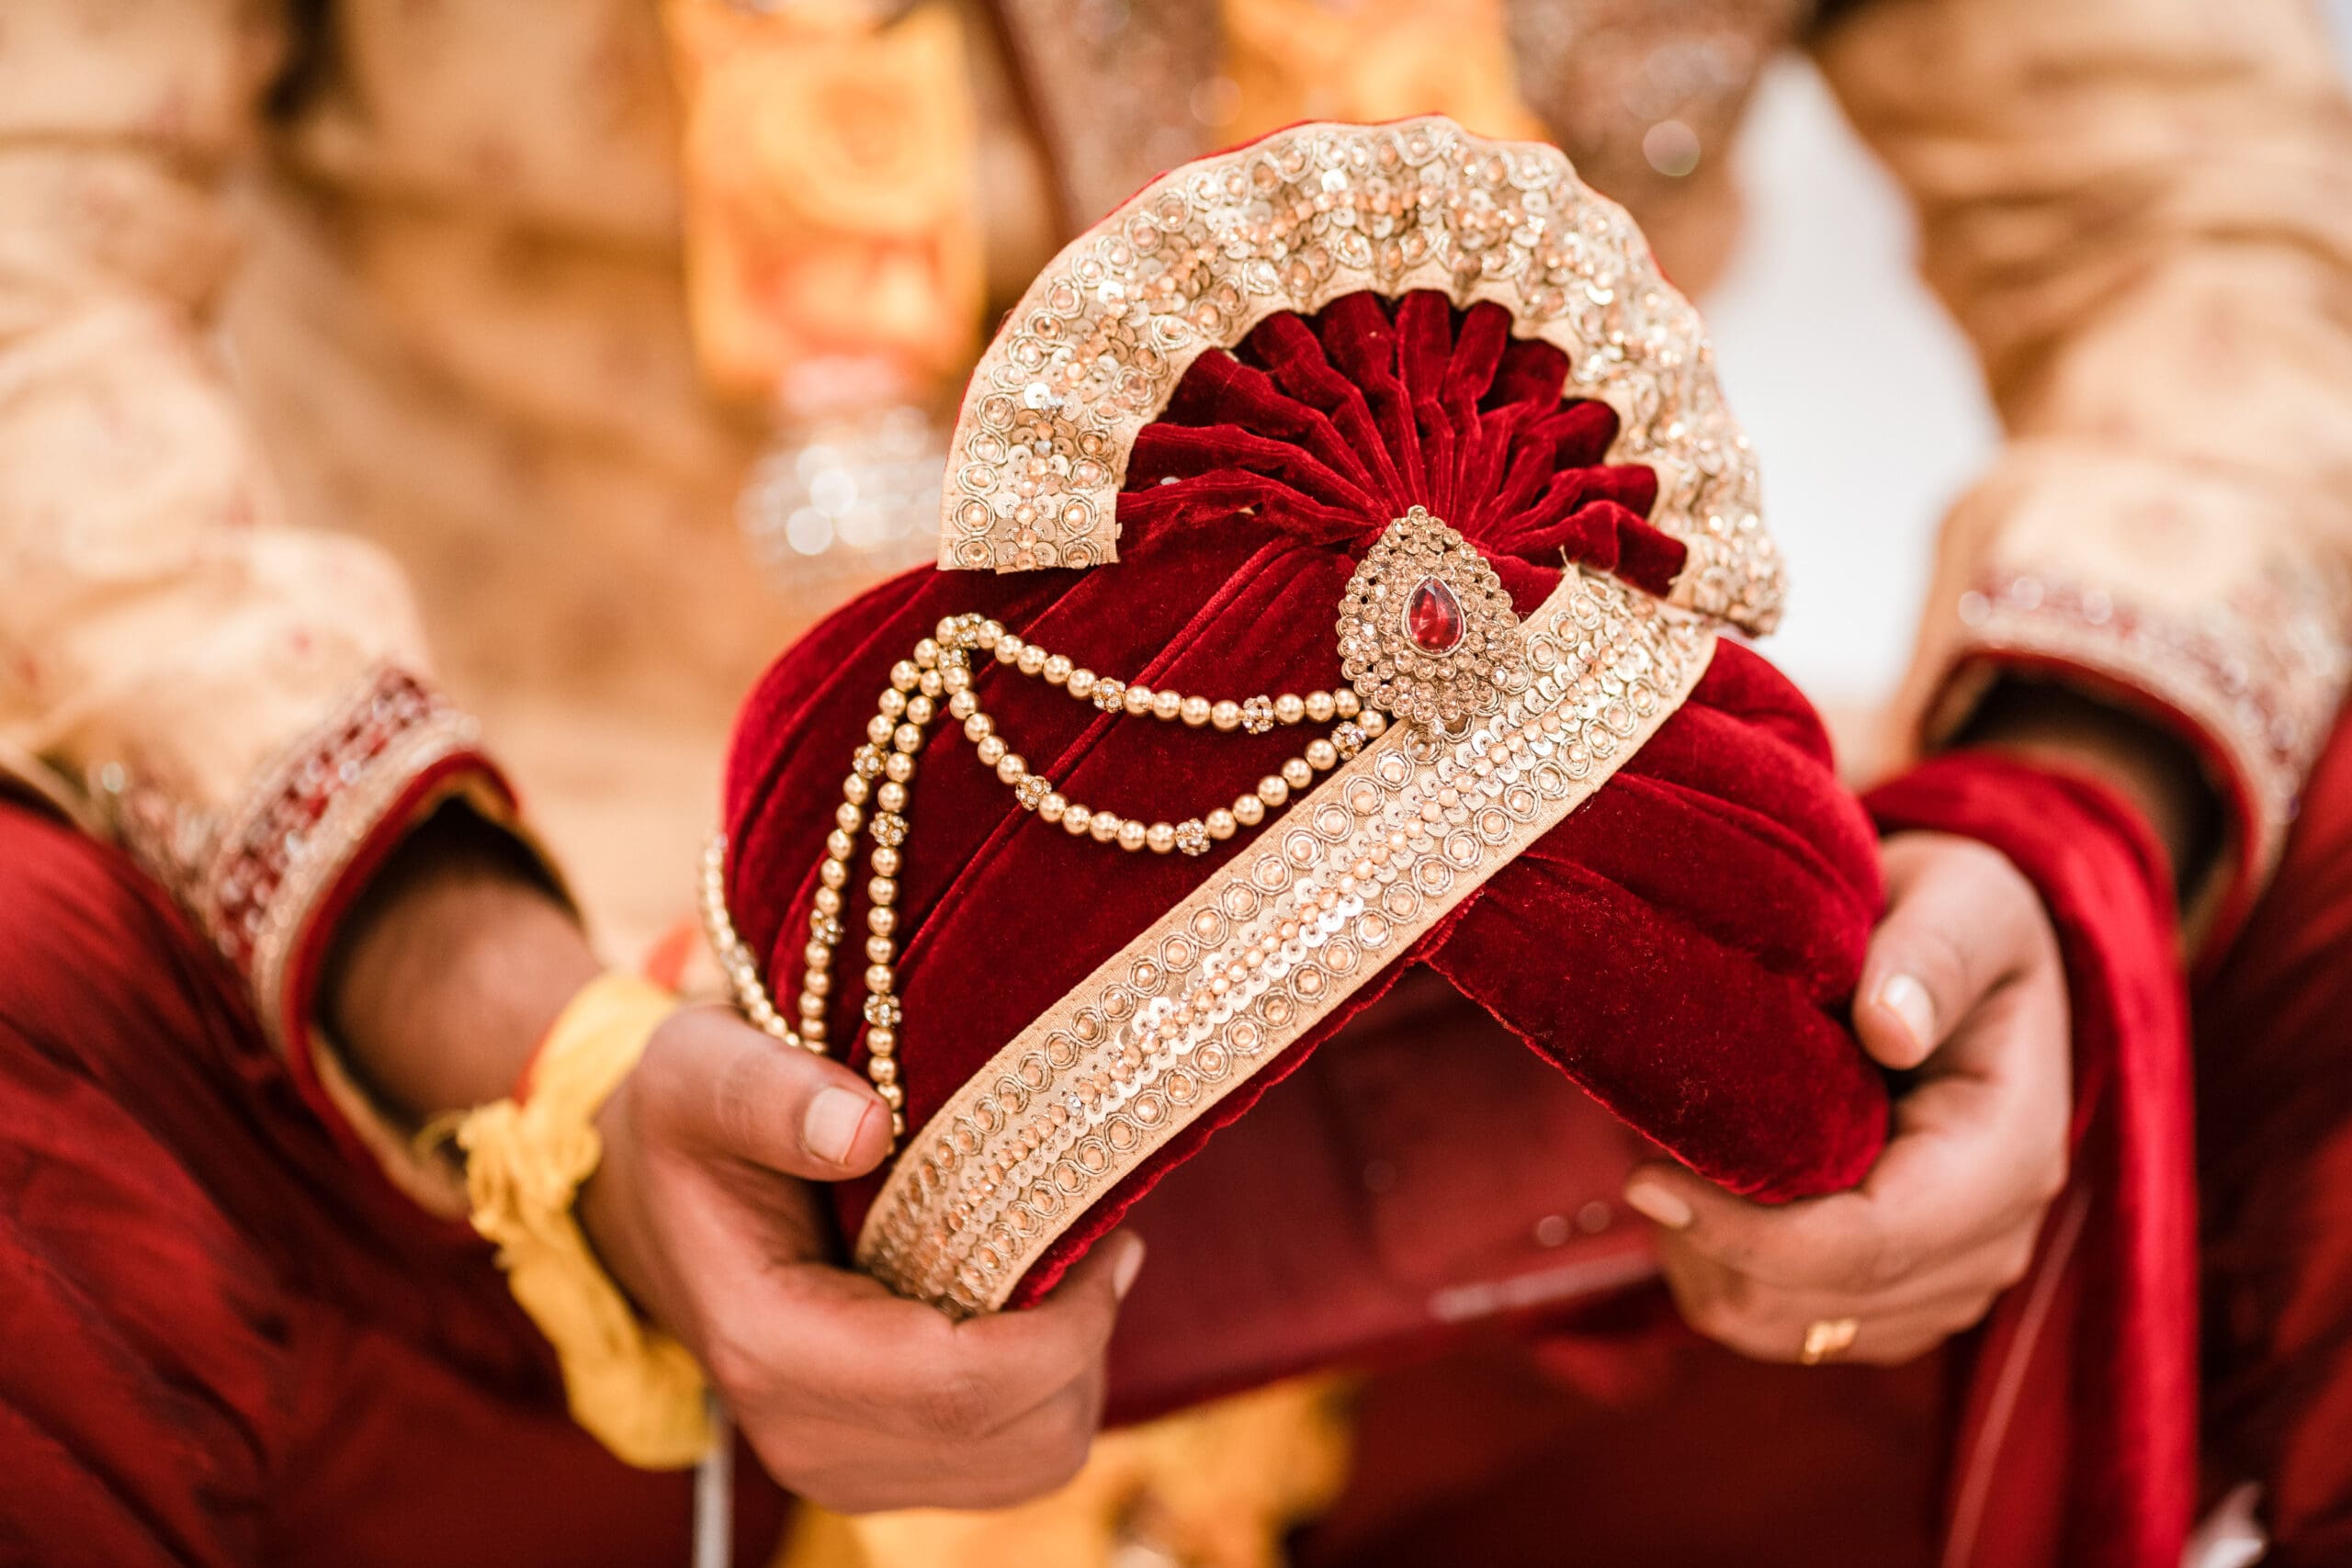 Traditional red headpiece adorned with gold, worn by the groom as part of an Indian wedding attire.